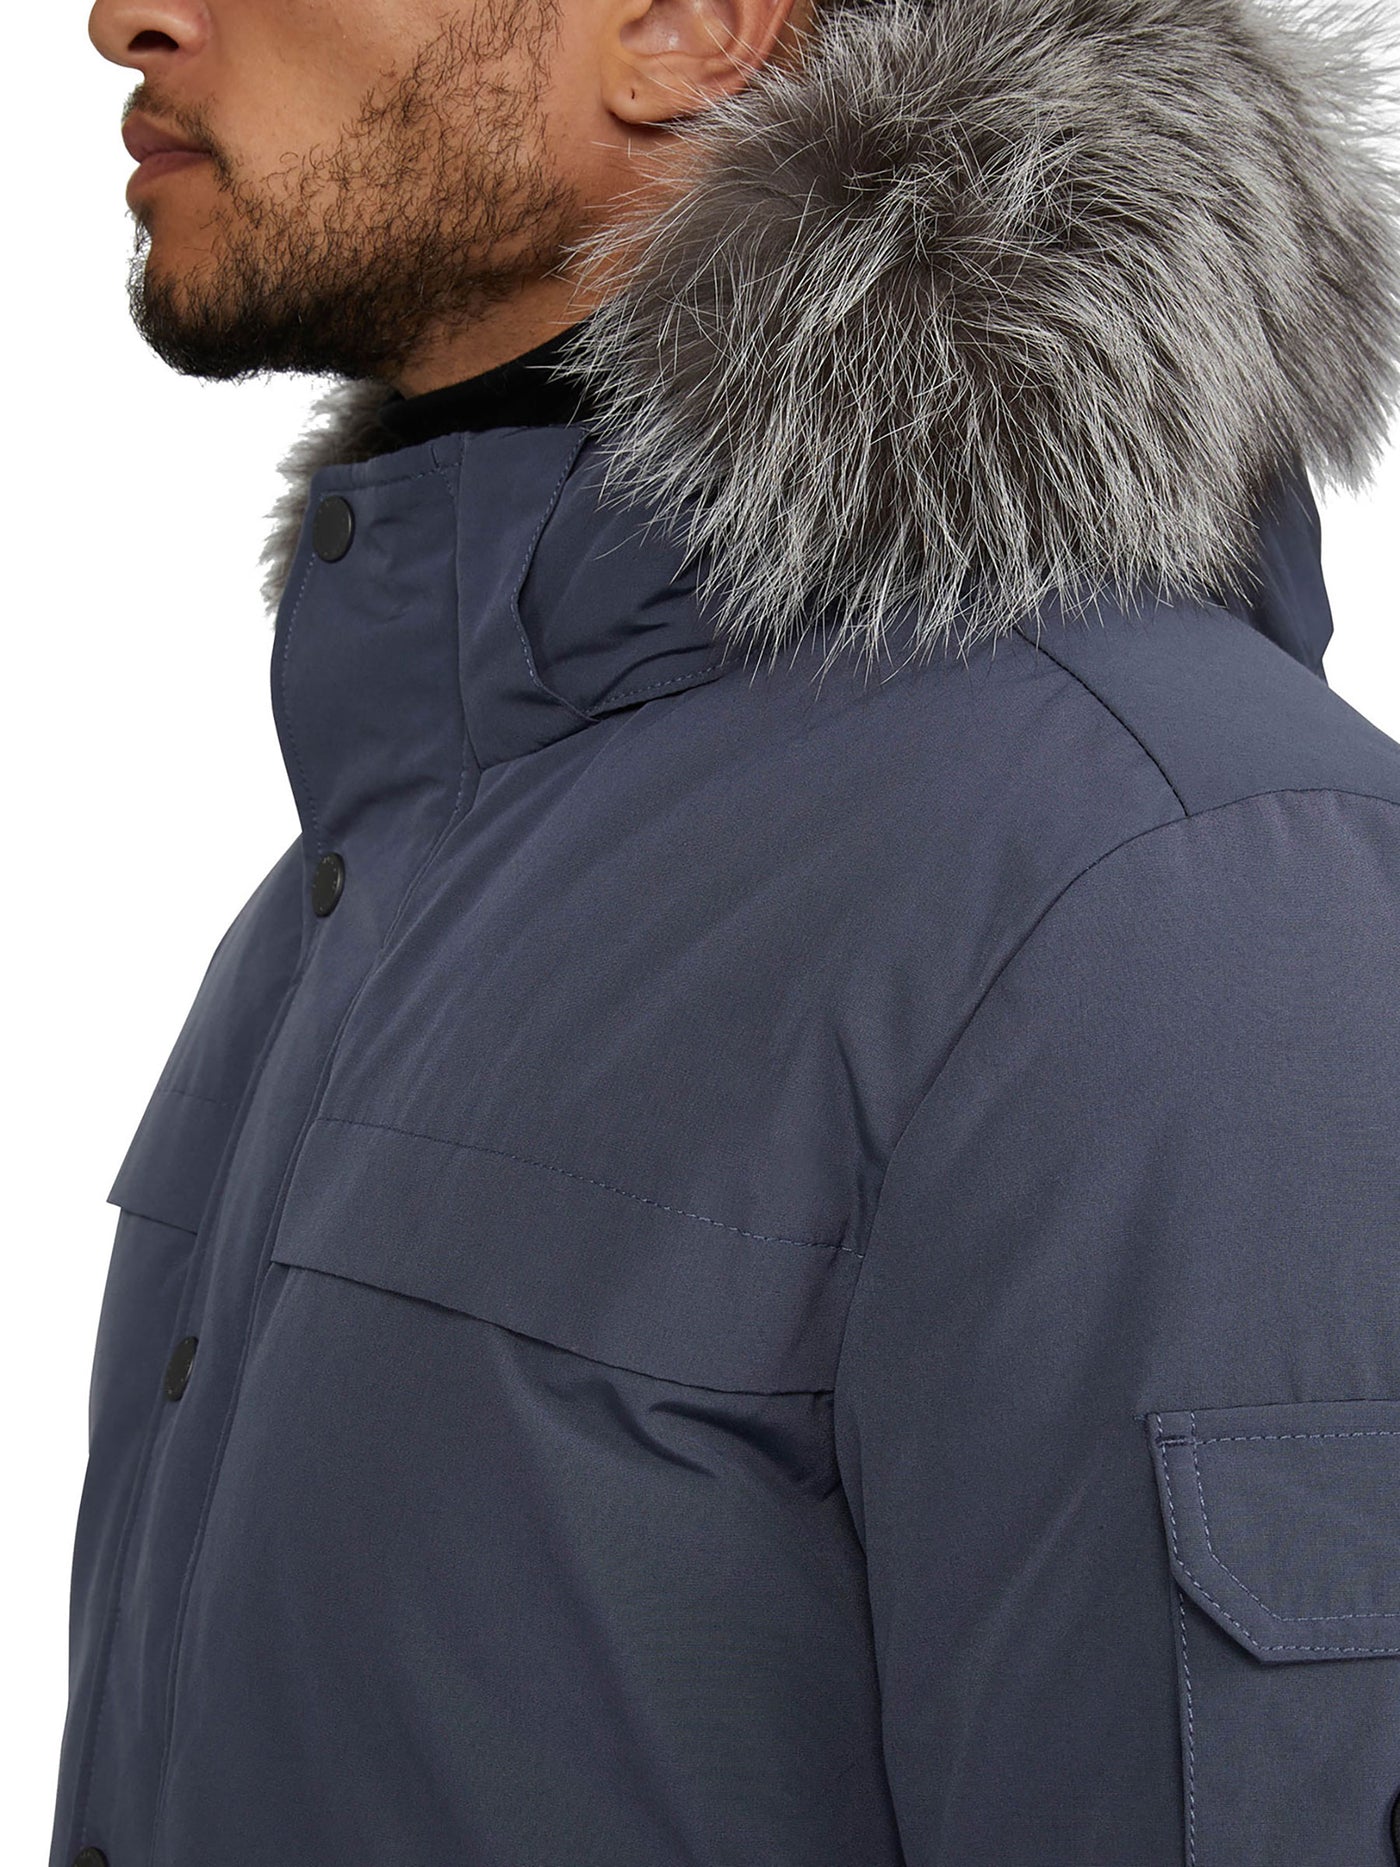 Clothing & Shoes - Jackets & Coats - Coats & Parkas - Menswear - Pajar  Outerwear Edgar Men's Hooded Parka With Faux Fur Trim - Online Shopping for  Canadians